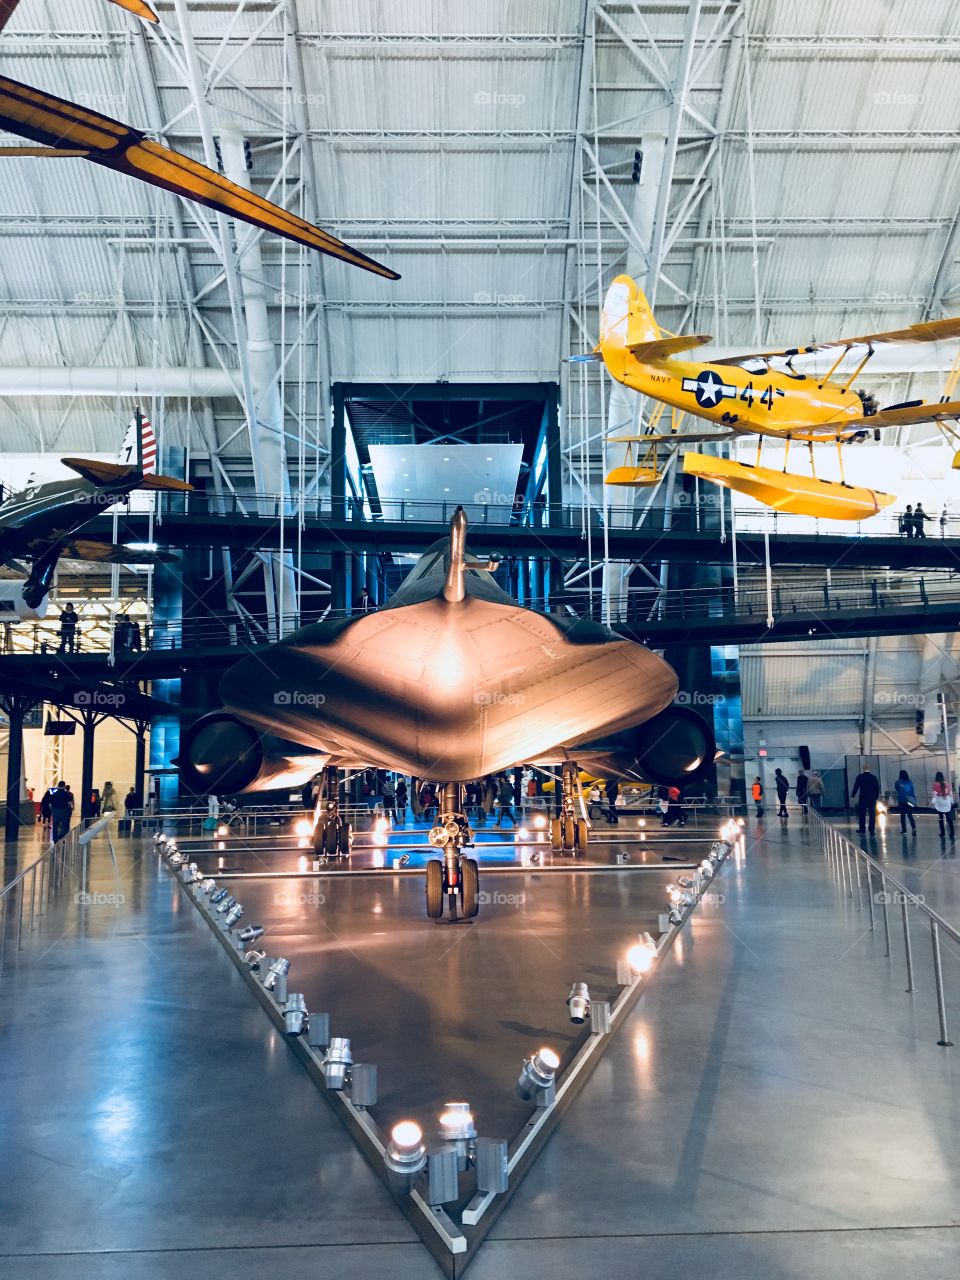 SR-71 Blackbird at the Smithsonian National Air and Space Museum 